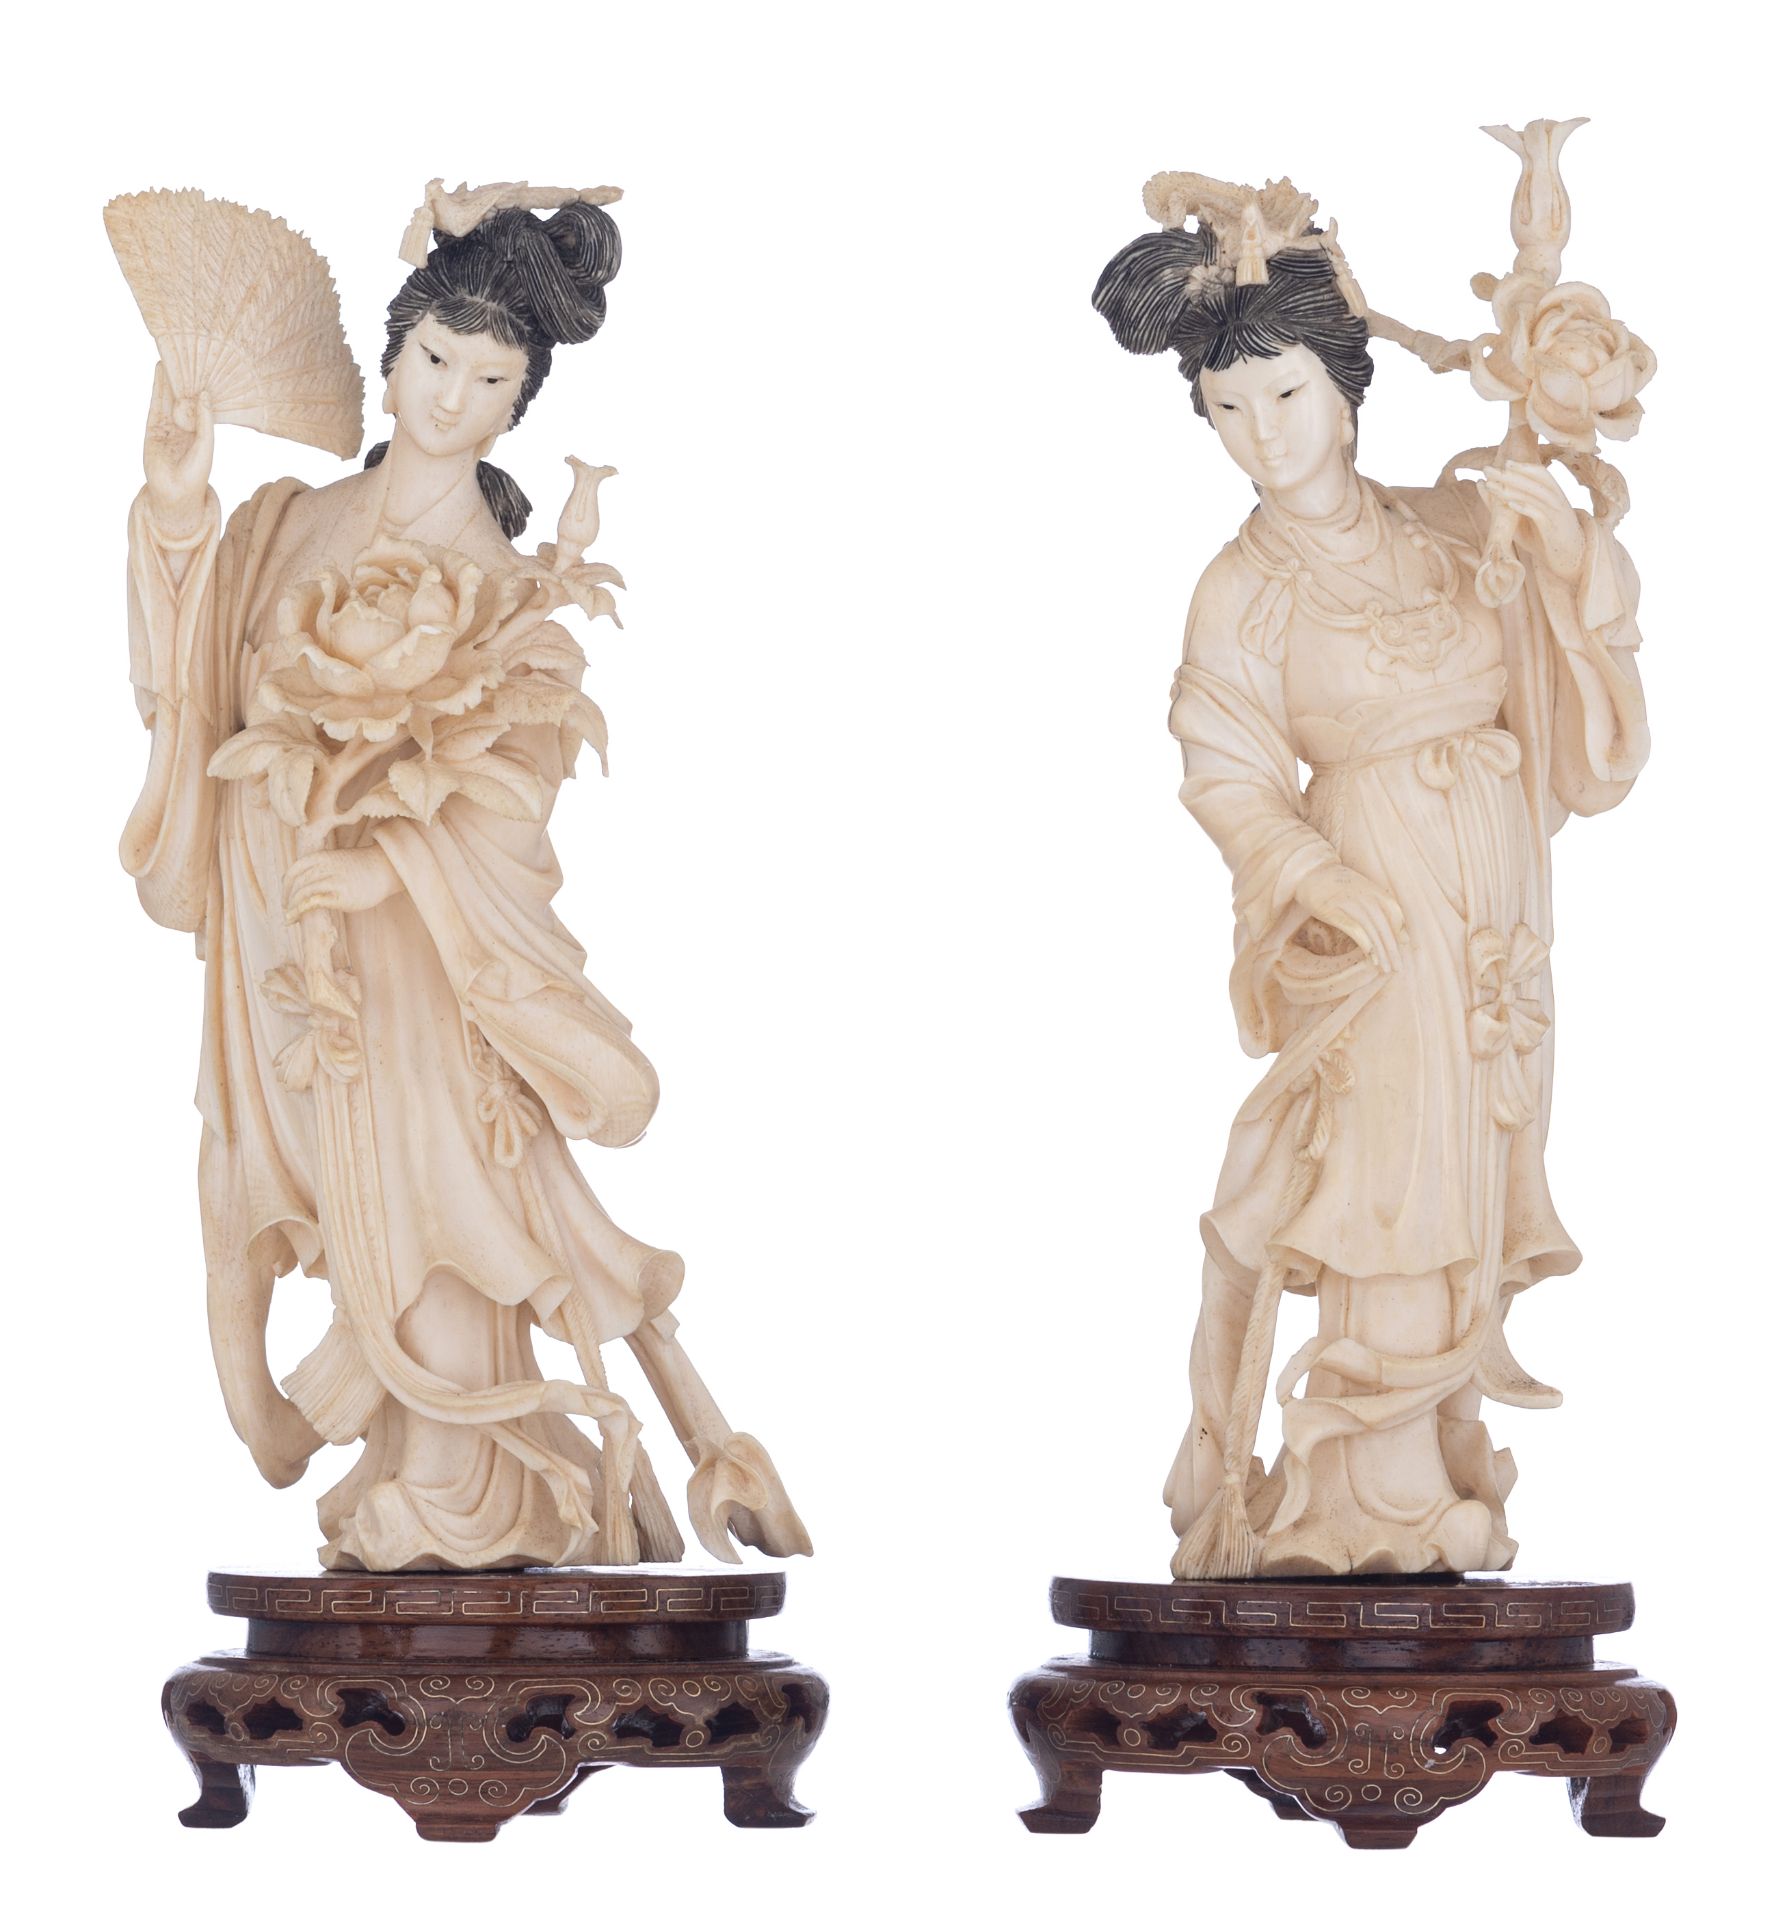 Two ivory Chinese beauties on wooden bases, first half 20thC, H 24 - 25 cm,